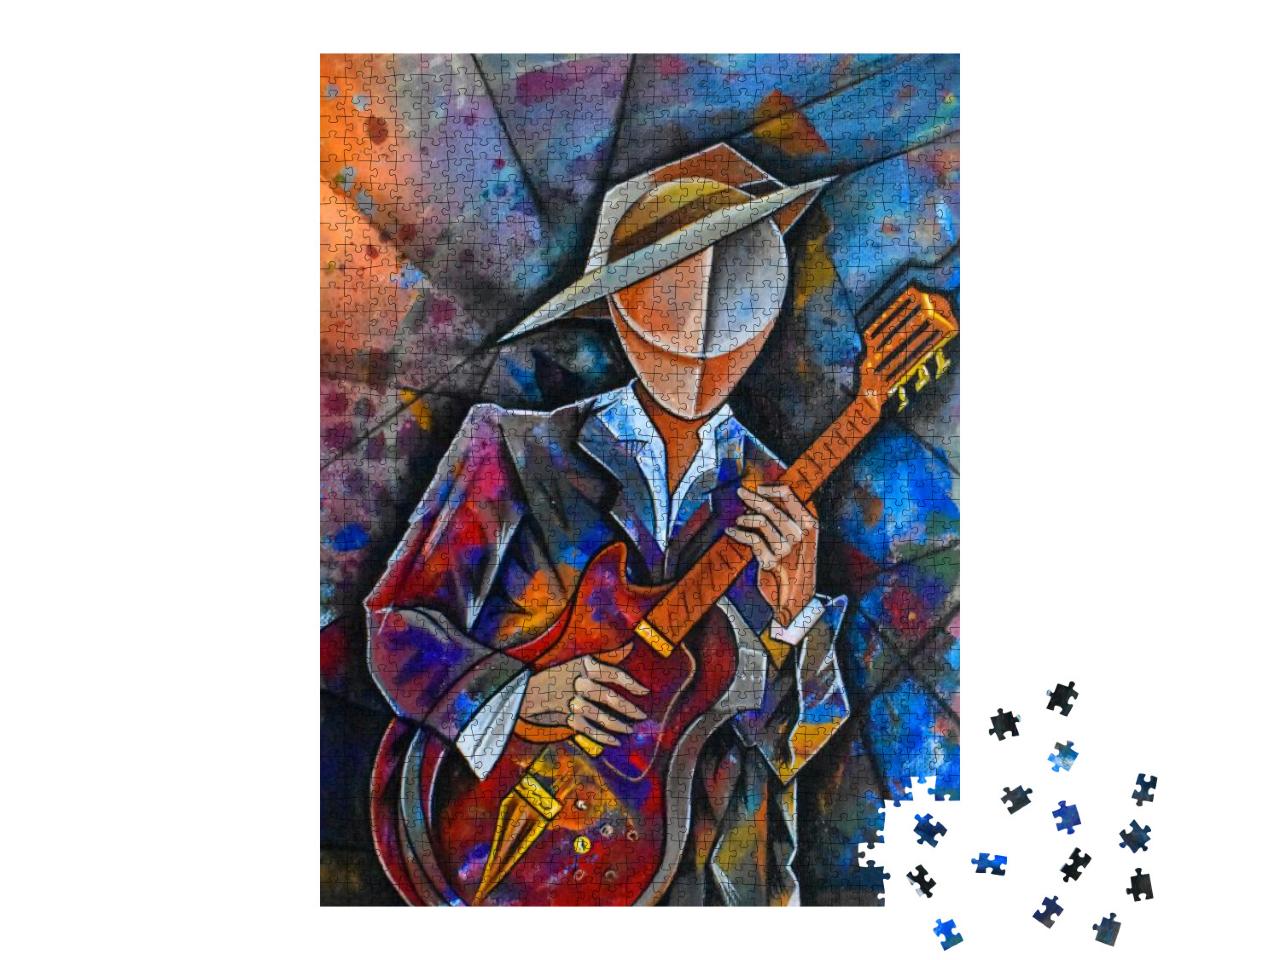 Cubist Surrealism Musician Painting Modern Abstract Desig... Jigsaw Puzzle with 1000 pieces